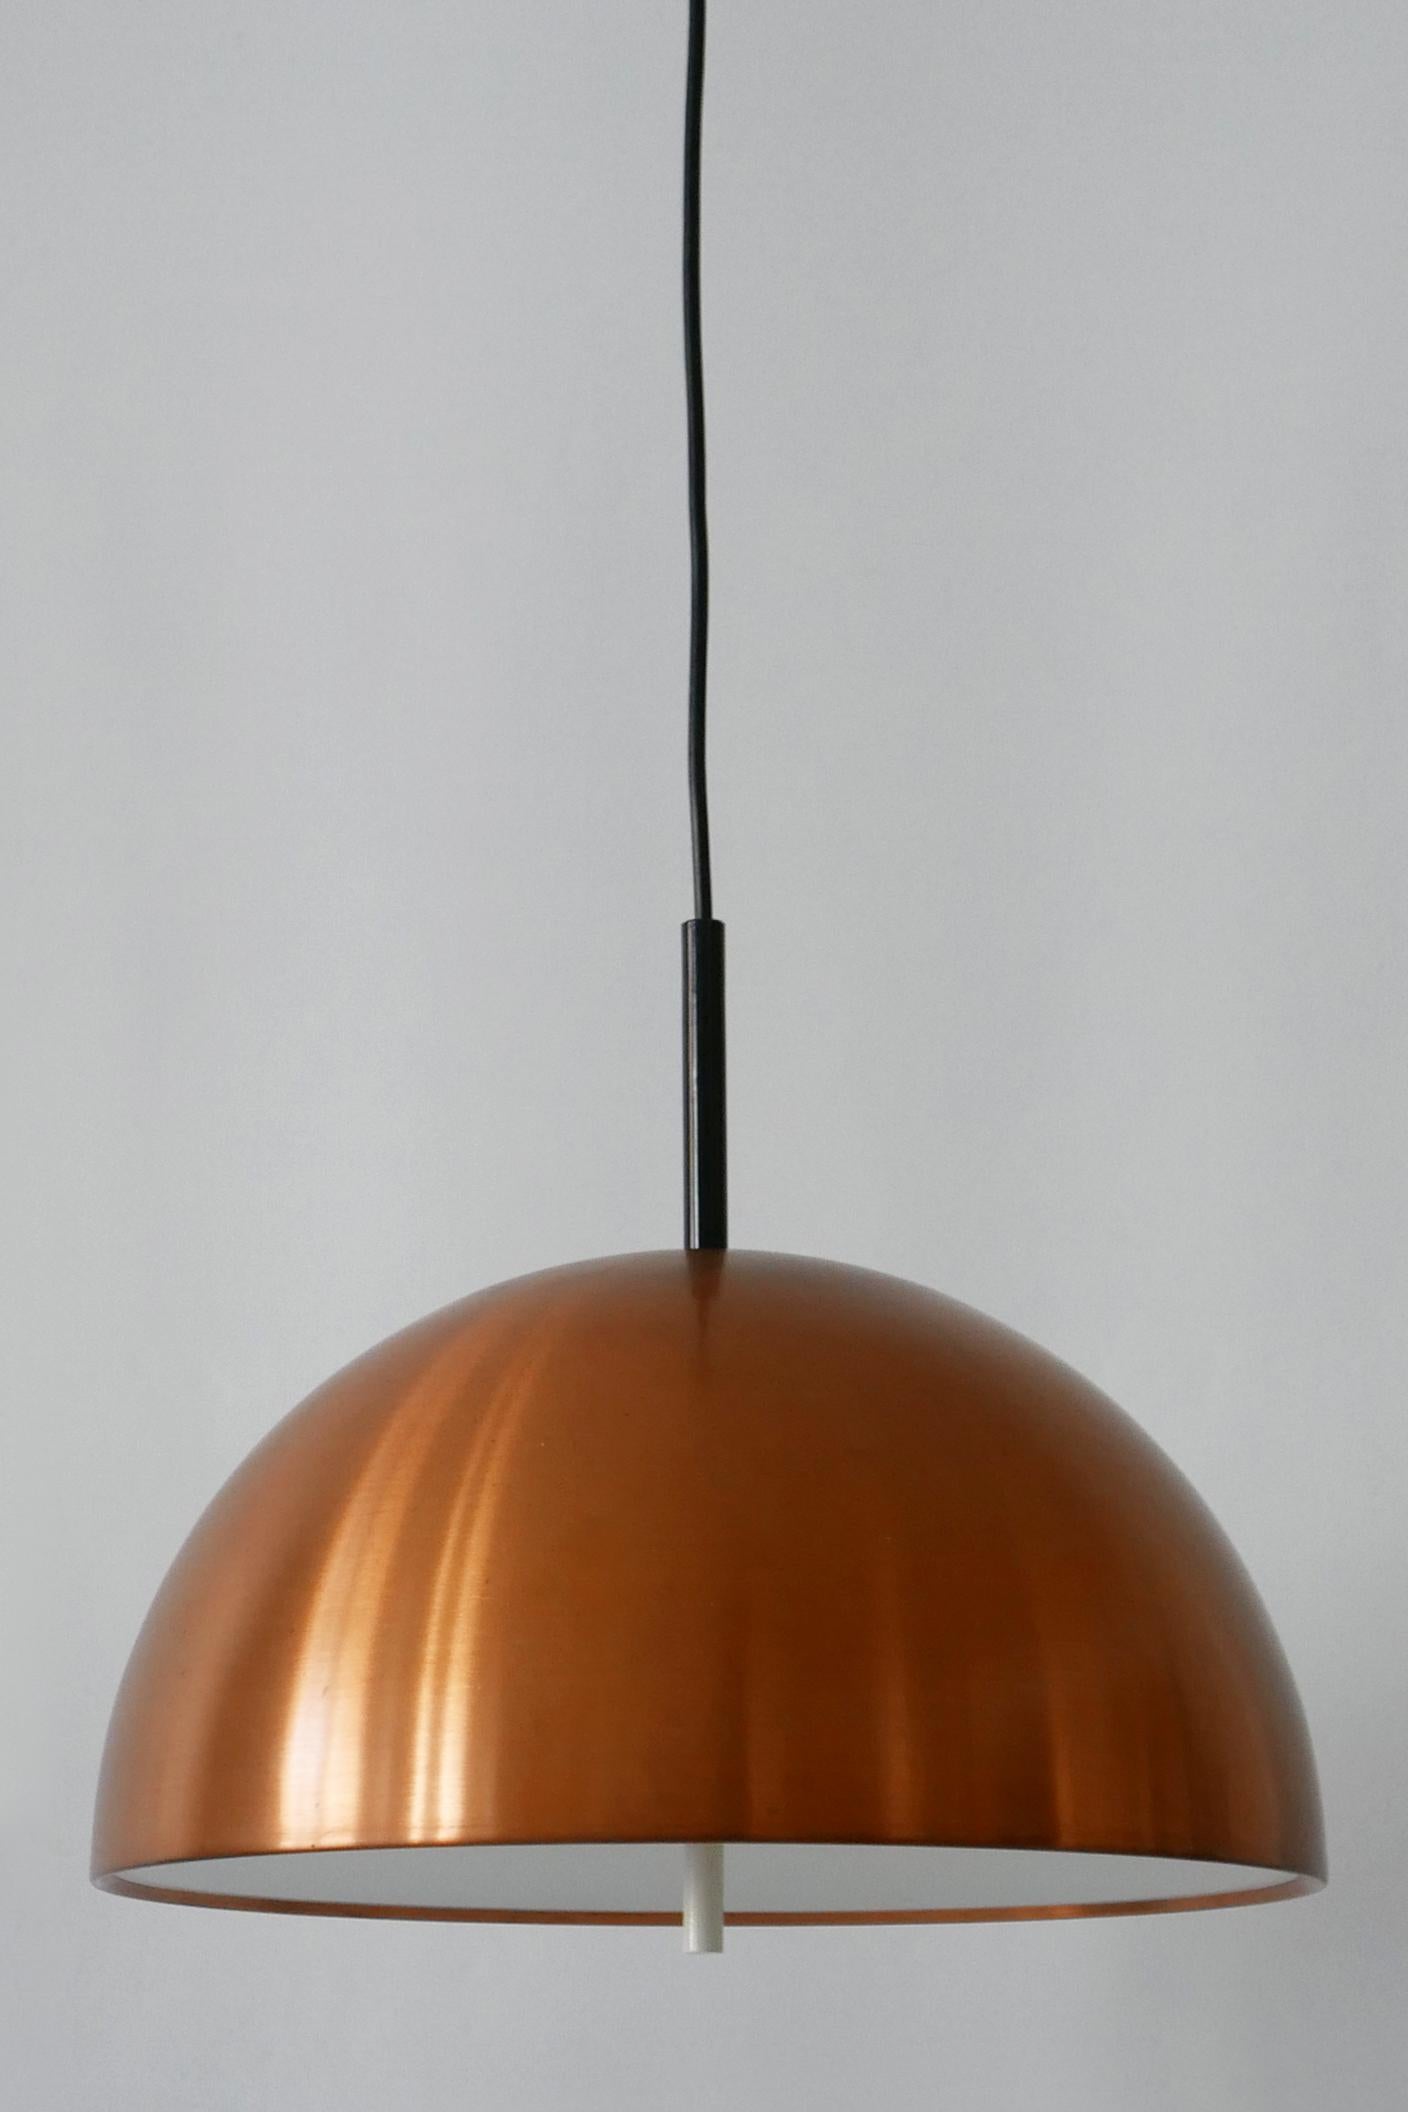 Minimalistic Mid-Century Modern copper pendant lamp or hanging light. Designed and manufactured by Staff & Schwarz Leuchtenwerke, 1960s, Germany.

Executed in copper sheet and plexiglass, the pendant lamp needs 2 x E27 / E26 Edison screw fit bulbs.